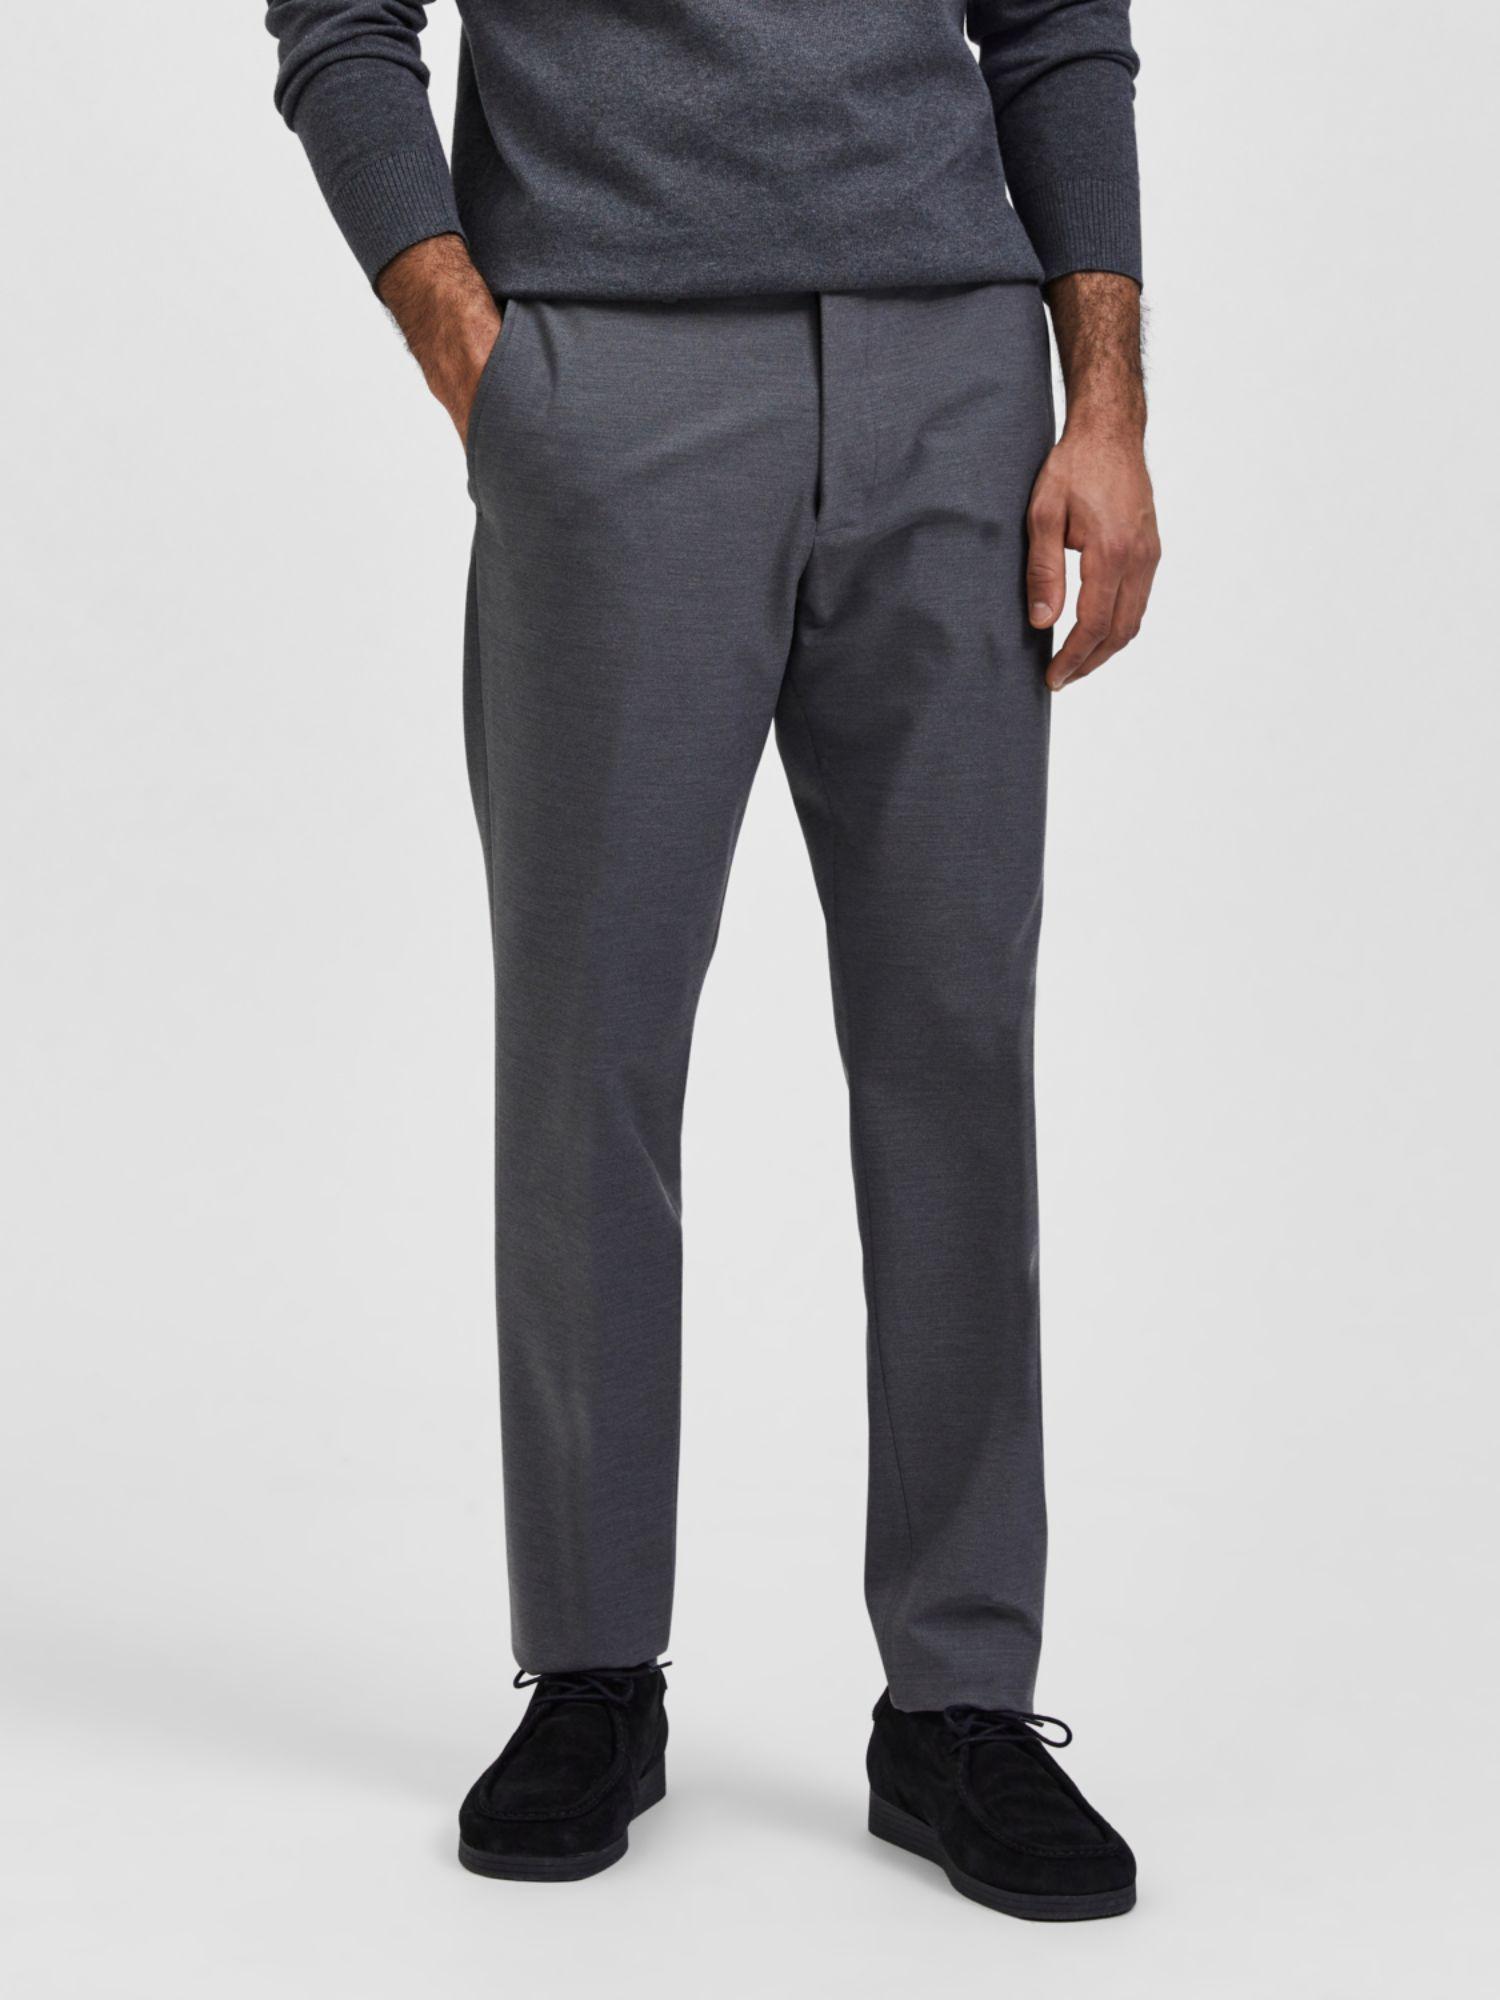 solid formal grey trouser